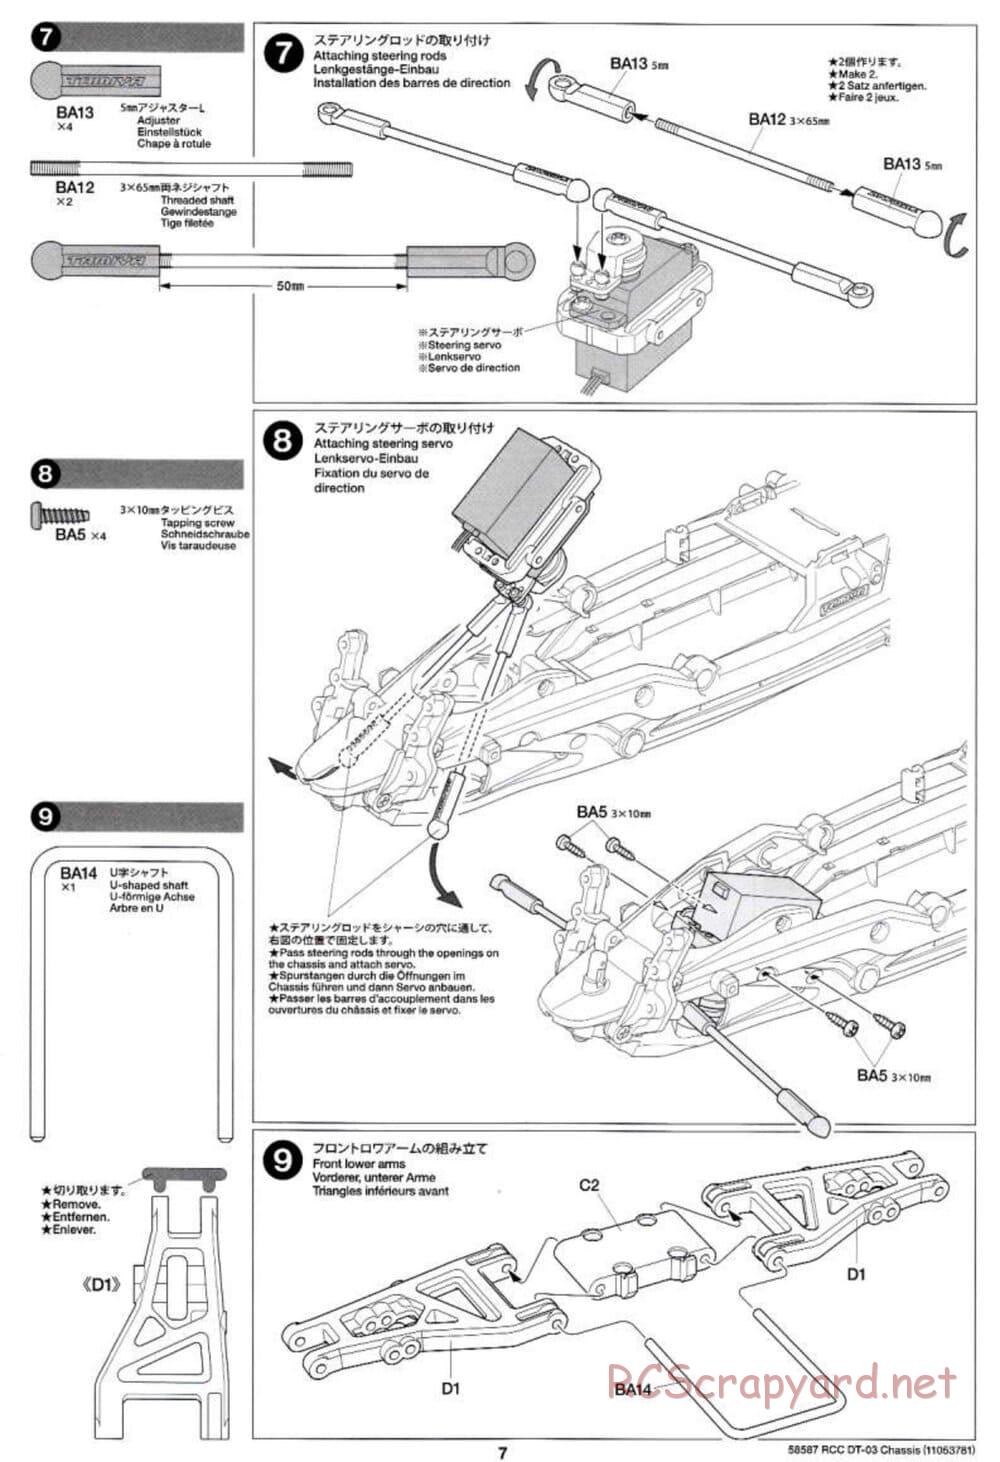 Tamiya - Neo Fighter Buggy Chassis - Manual - Page 7